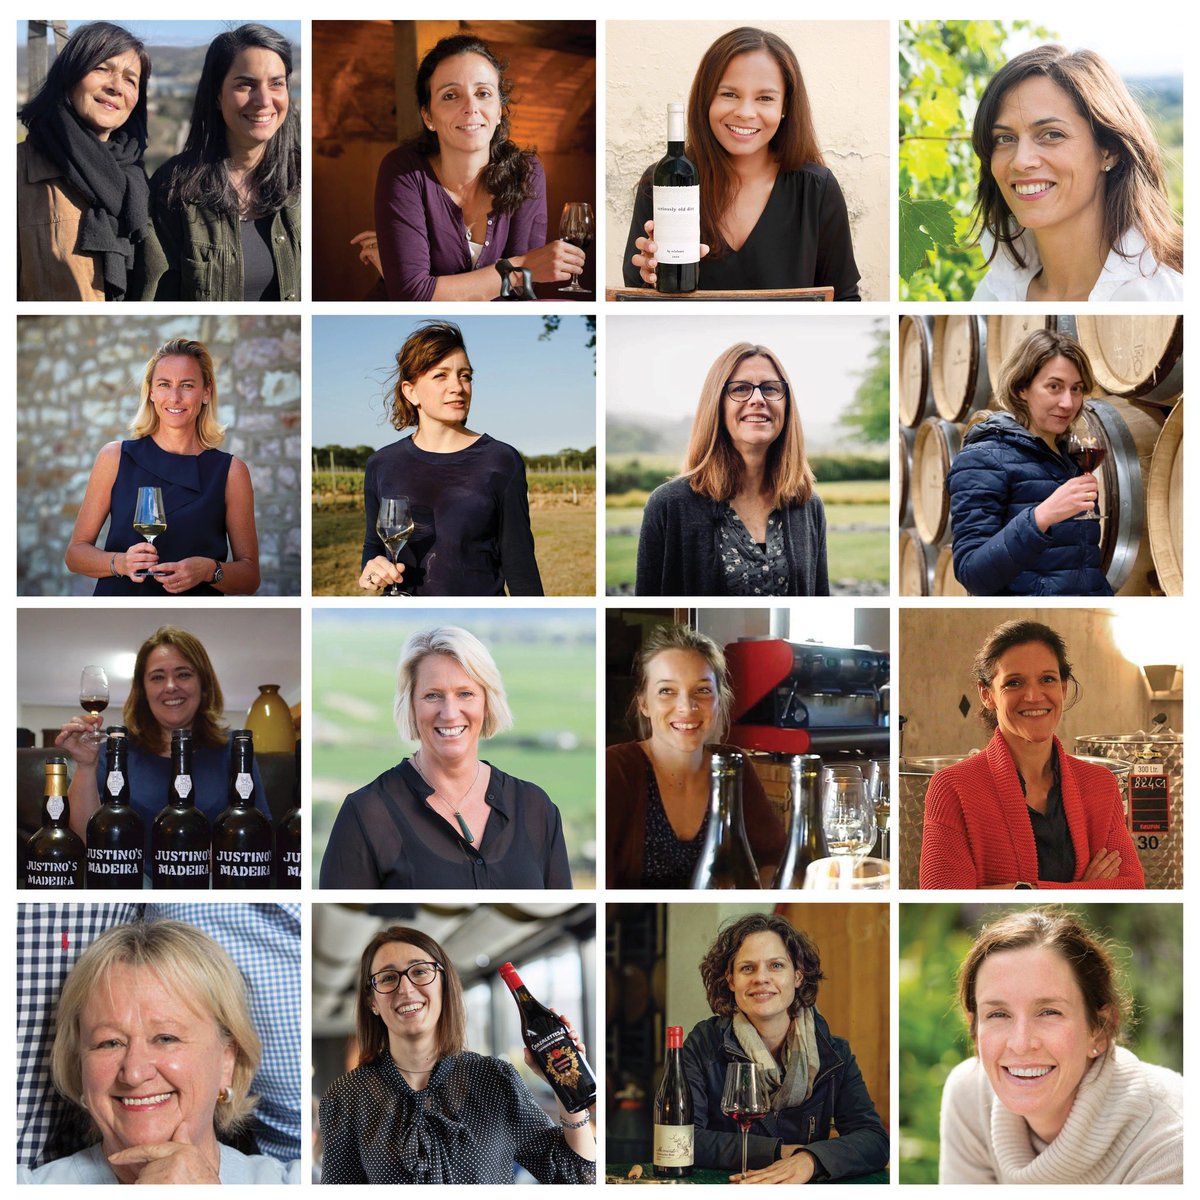 HAPPY INTERNATIONAL WOMEN'S DAY! ♀
We cheers to all women in wine from the estate owners, to the winemakers, to the pioneers!

#HappyInternationalWomansDay #InternationalWomensDay #womeninwine #womenofwine